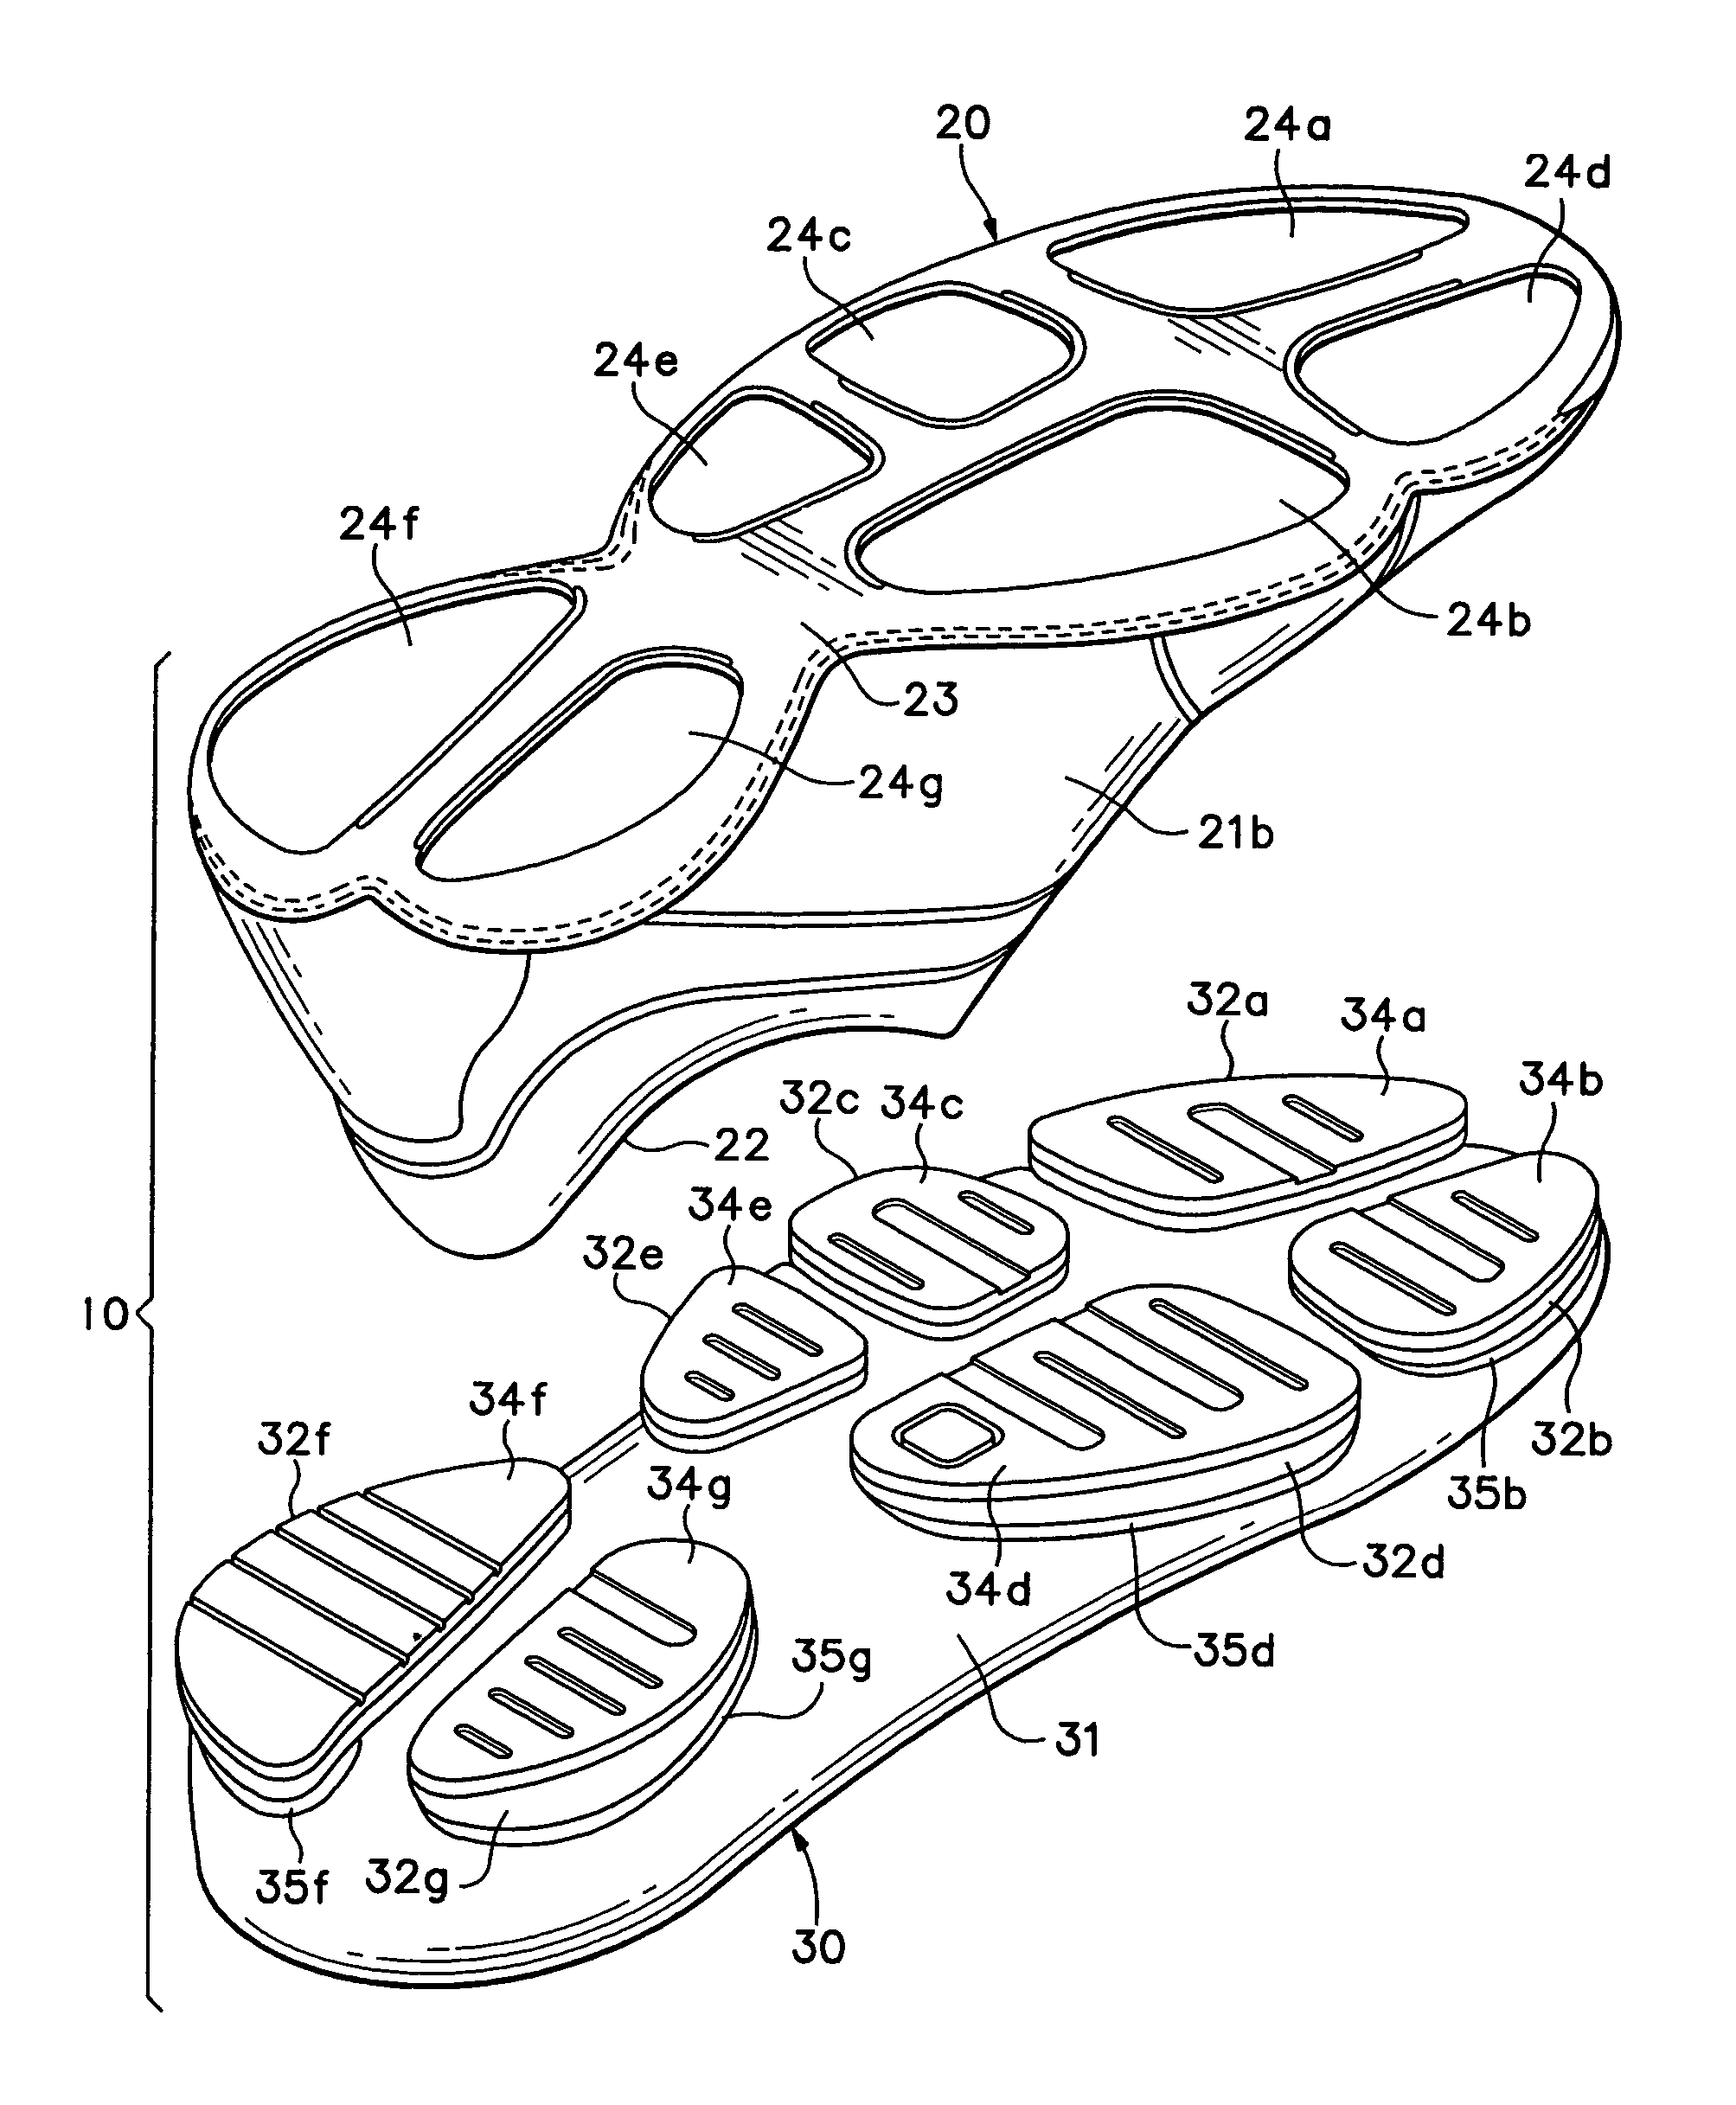 Footwear with separable upper and sole structure